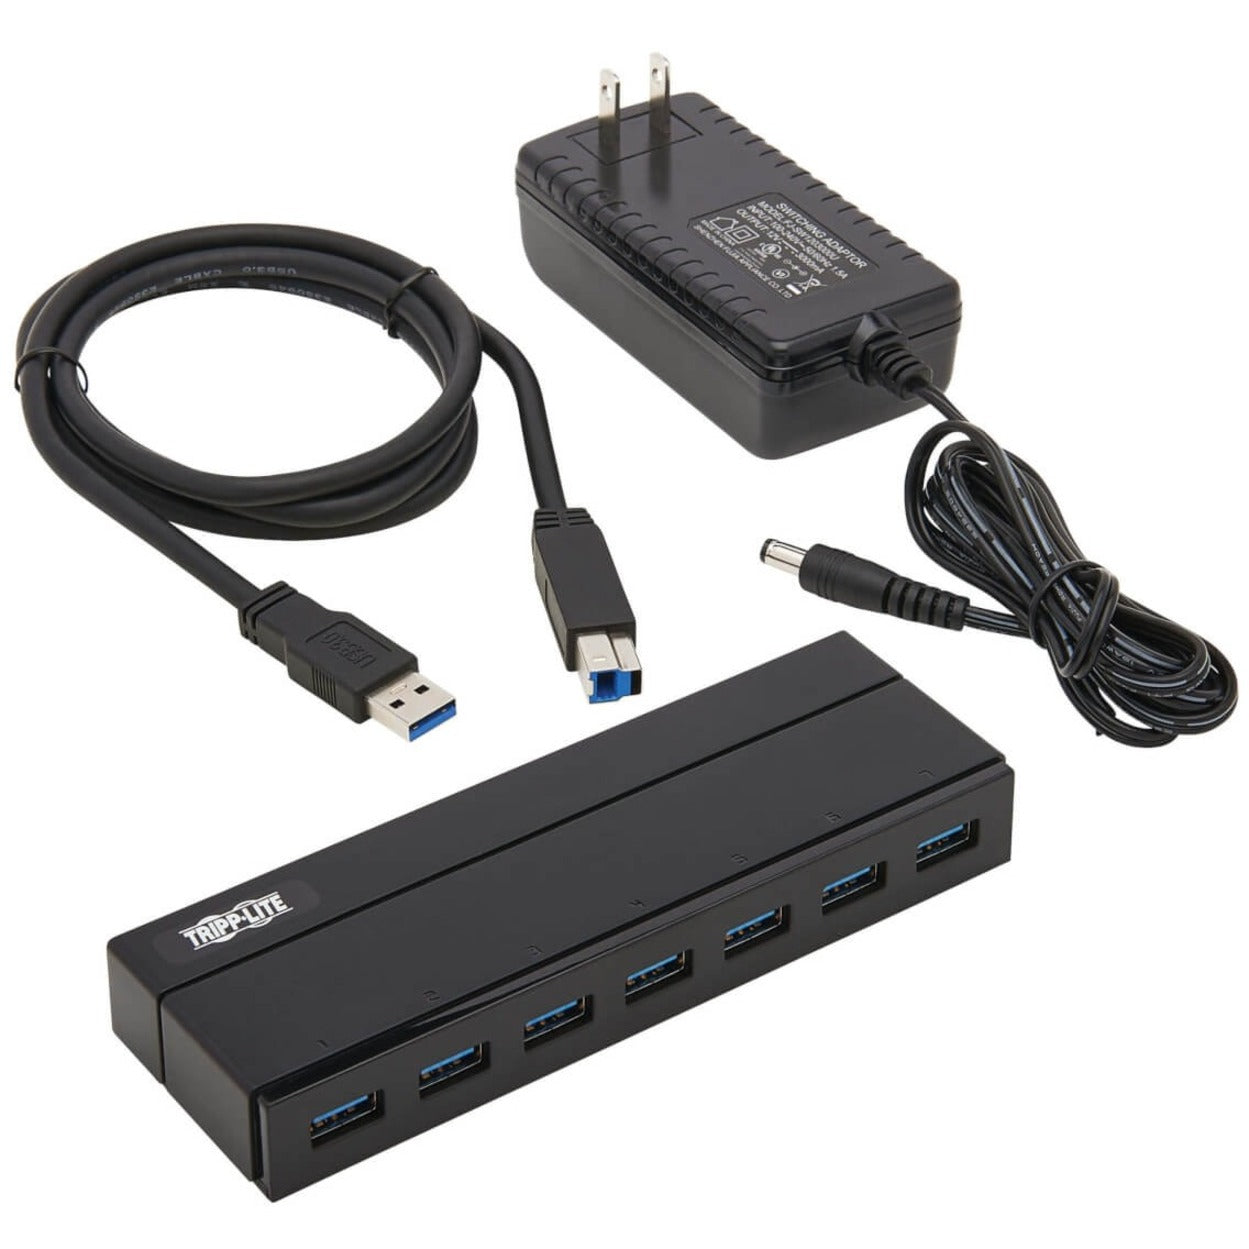 Tripp Lite U360-007 USB 3.0 Charging Hub - Expand Your USB Connectivity and Charge iPad 2